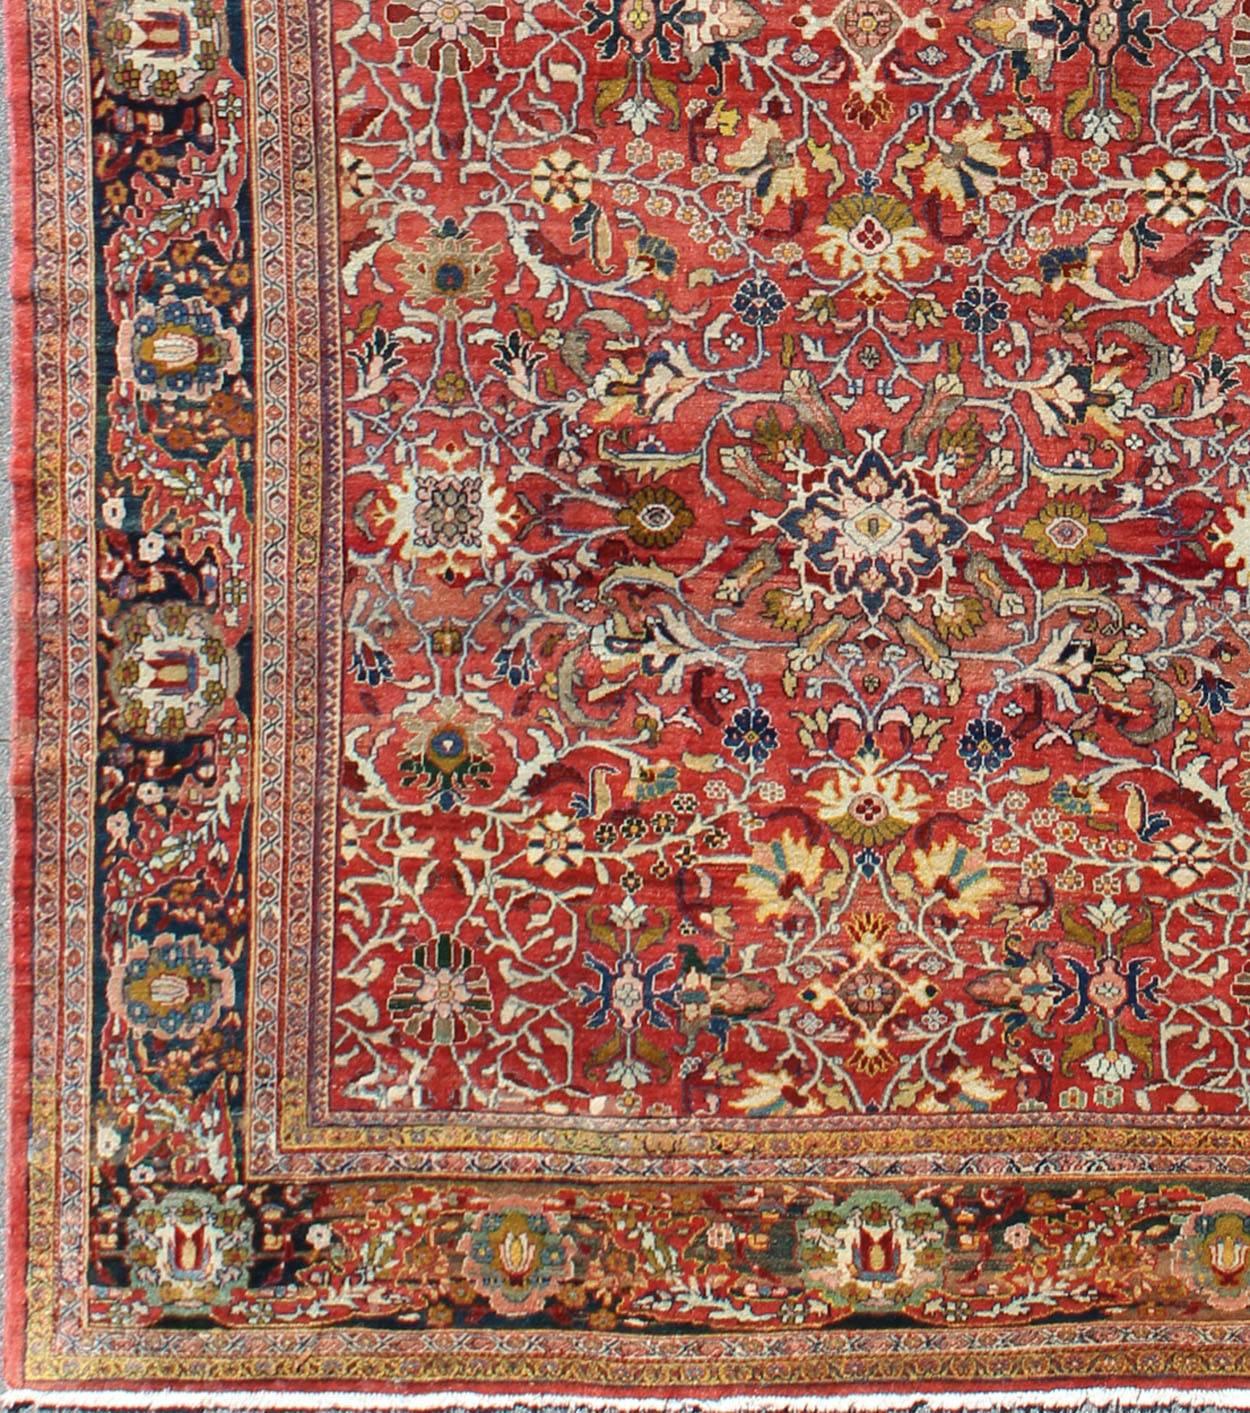 This beautiful Sultanabad rug features a soft red field, which bears an intricate floral motif of repeating red, blue, ivory, green, yellow, peach, and light blue flowers. A blue border displays single flower blossoms interspersed with palmettes